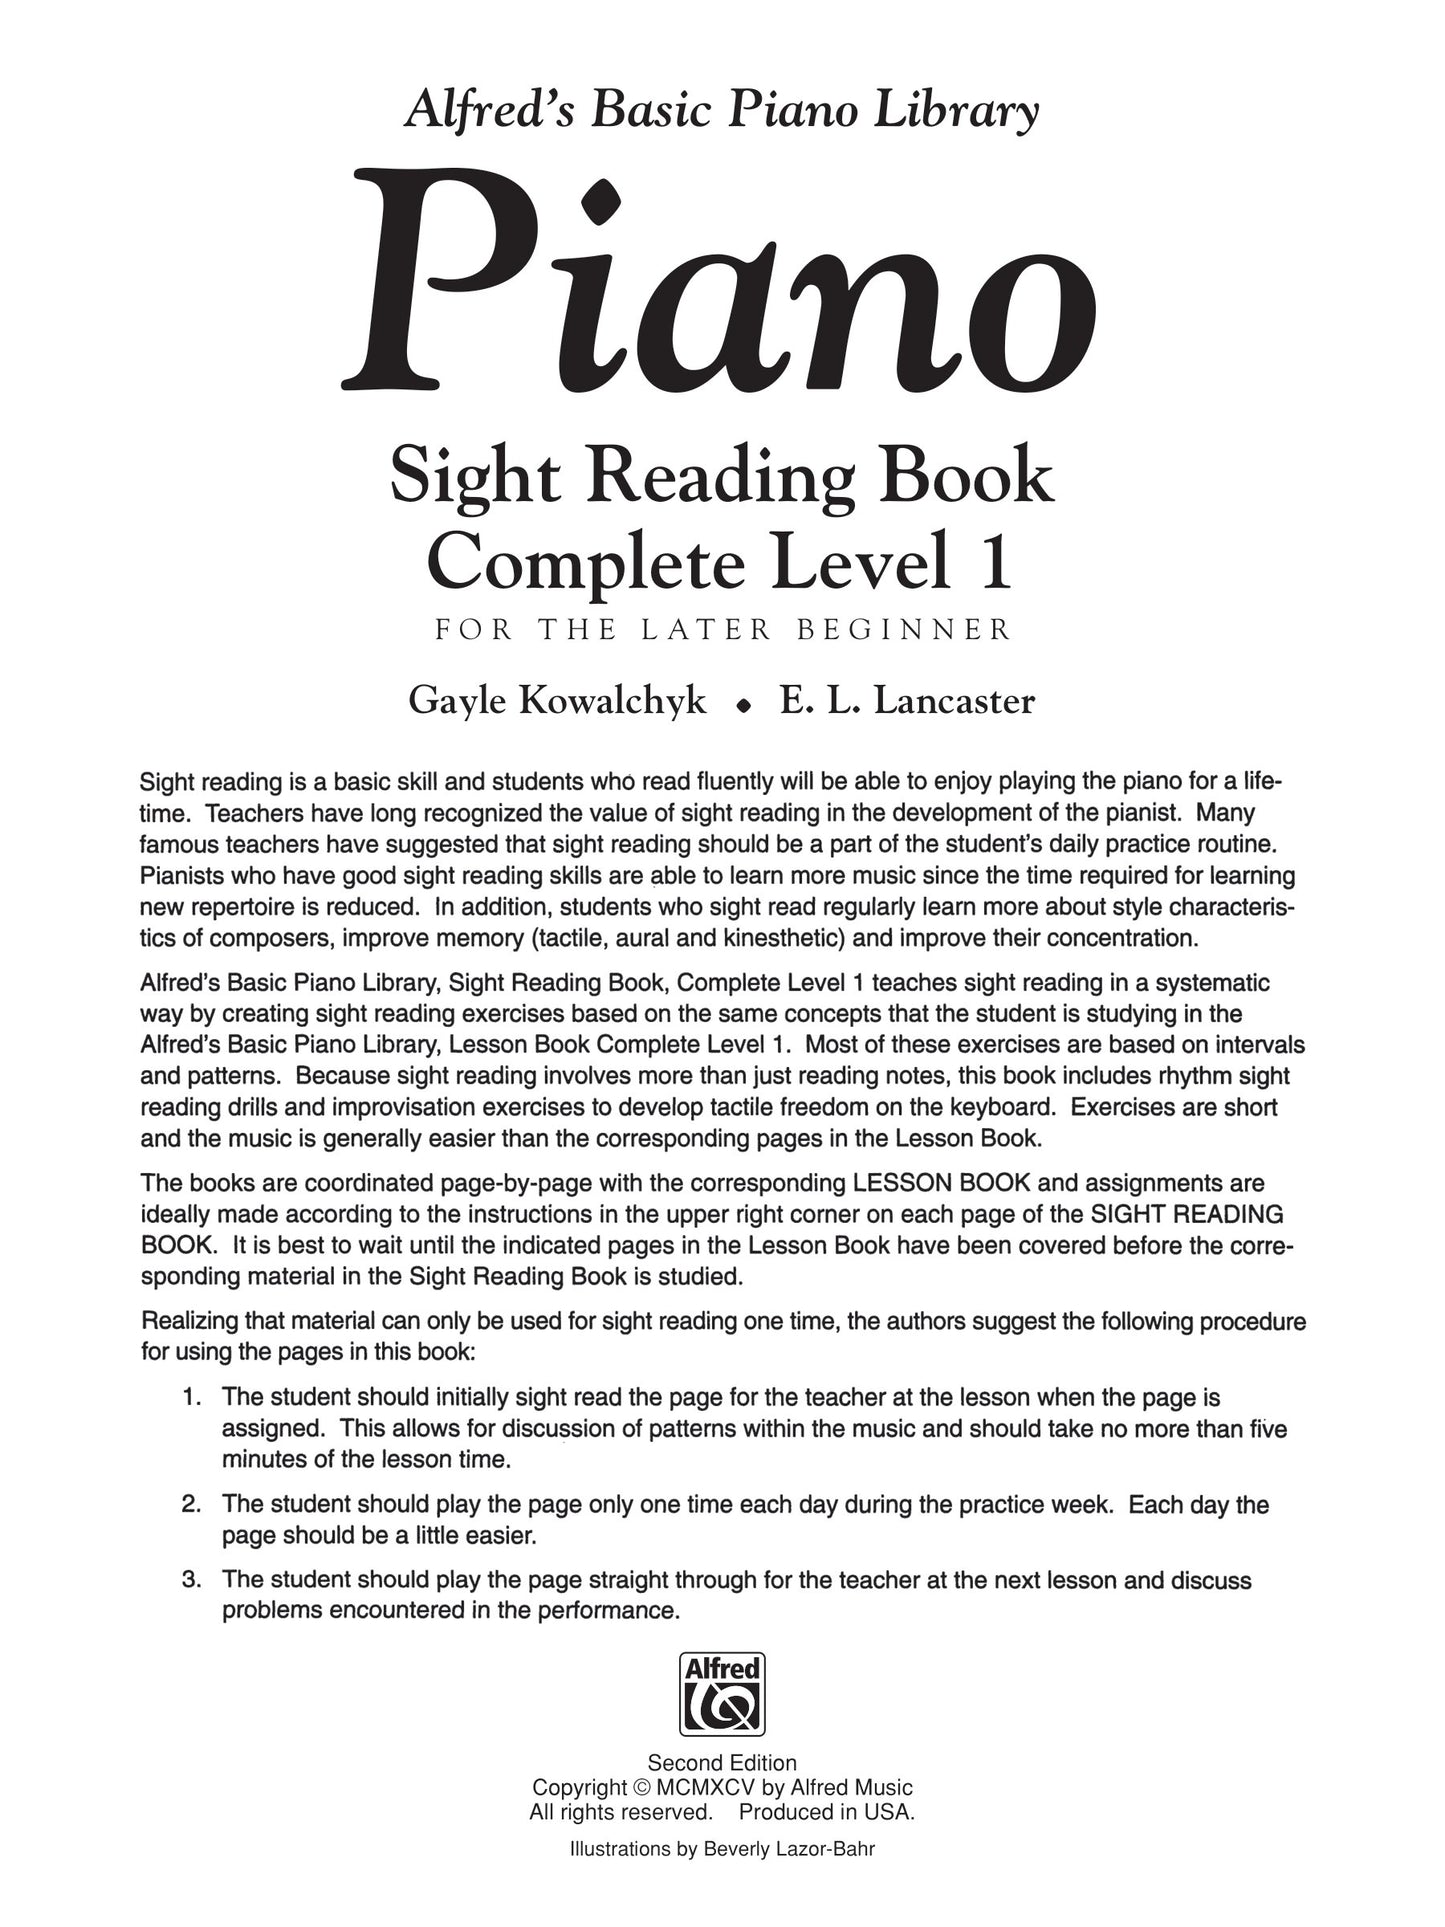 Alfred's Basic Piano Library - Sight Reading Complete Level 1 (1A/1B)